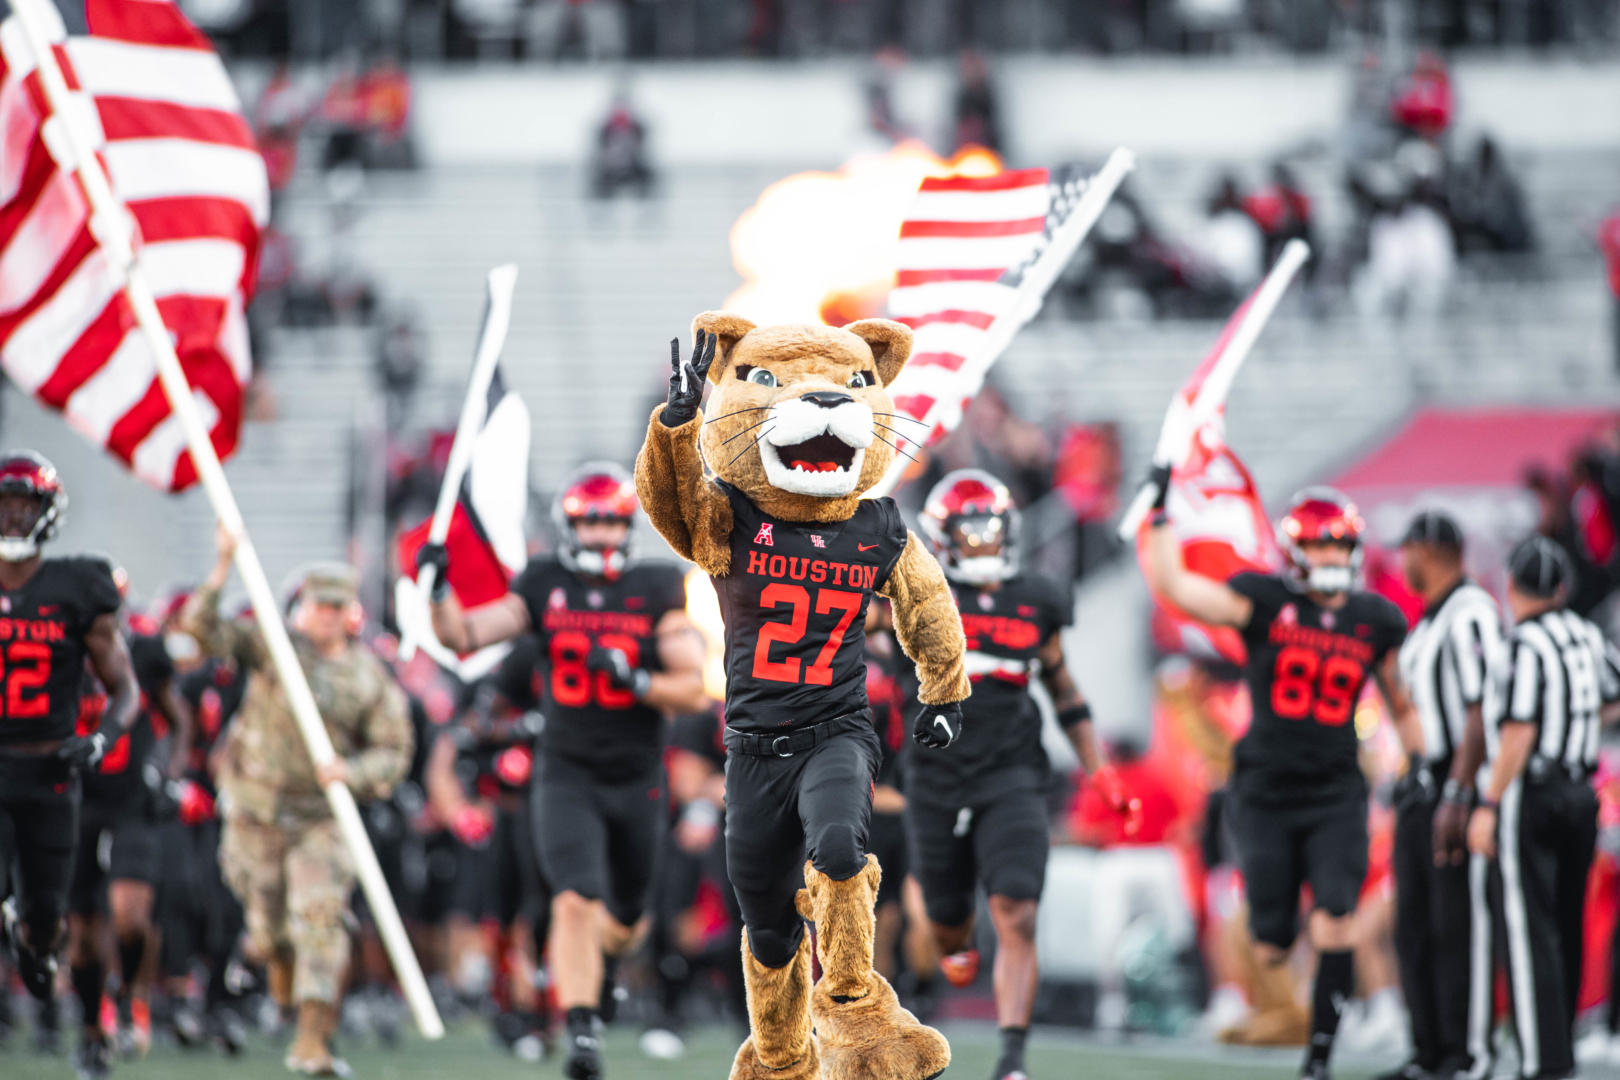 UH football will enter the 2022 college football season back in the AP Top 25. | James Schillinger/The Cougar